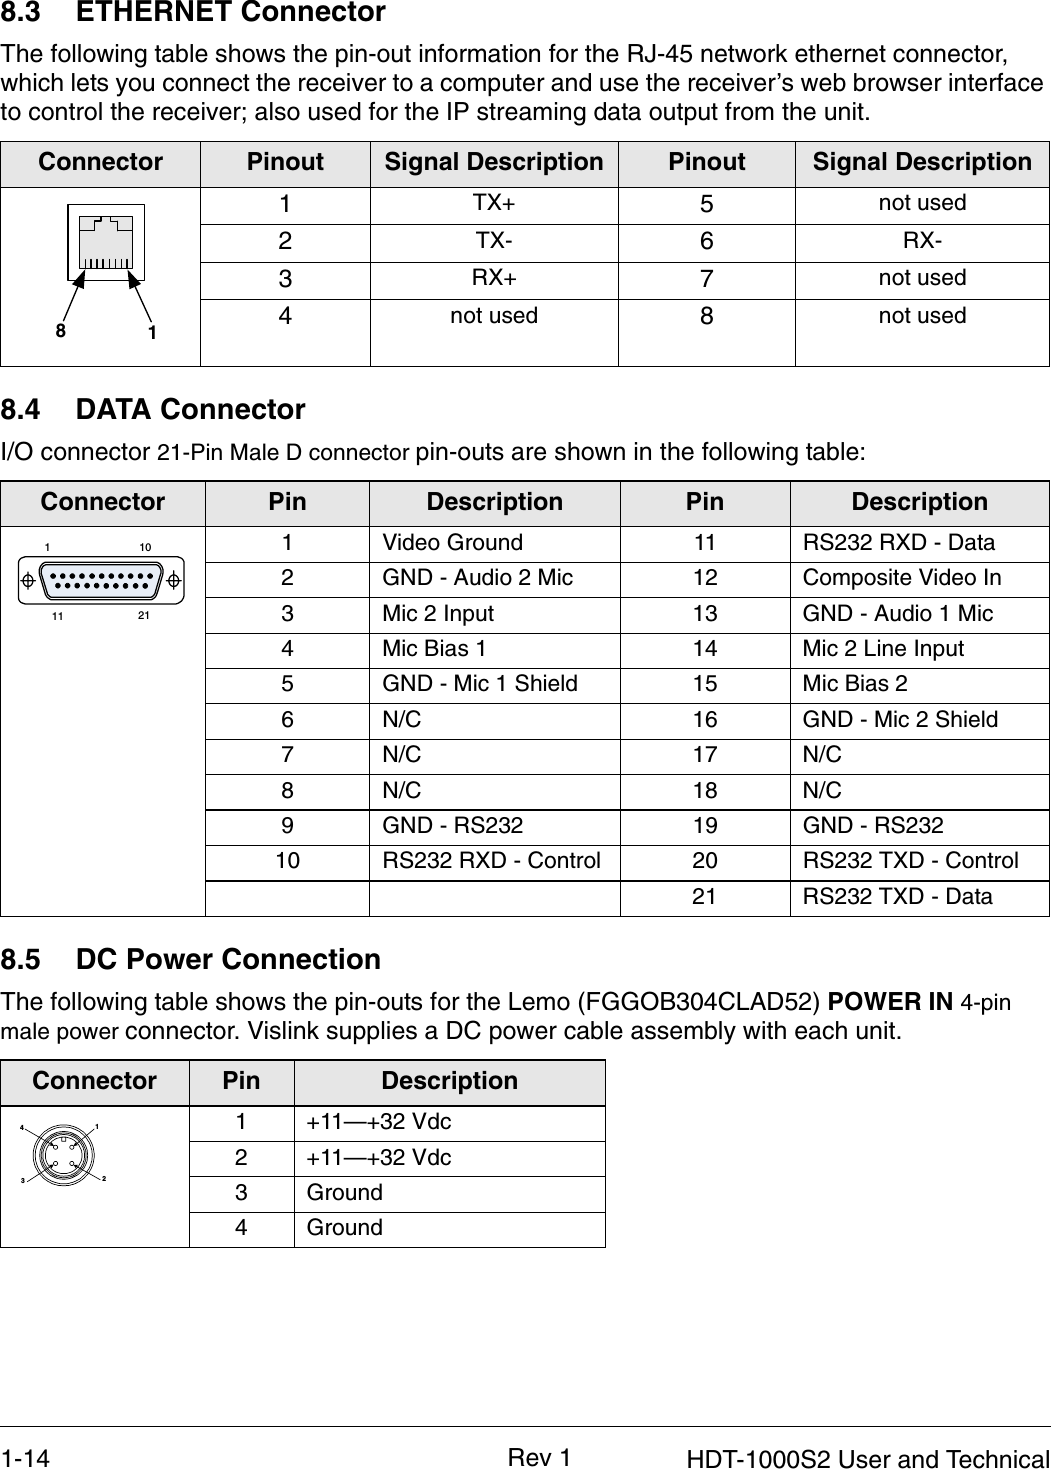 1-14    HDT-1000S2 User and TechnicalRev 18.3 ETHERNET ConnectorThe following table shows the pin-out information for the RJ-45 network ethernet connector, which lets you connect the receiver to a computer and use the receiver’s web browser interface to control the receiver; also used for the IP streaming data output from the unit. 8.4 DATA ConnectorI/O connector 21-Pin Male D connector pin-outs are shown in the following table:8.5 DC Power ConnectionThe following table shows the pin-outs for the Lemo (FGGOB304CLAD52) POWER IN 4-pin male power connector. Vislink supplies a DC power cable assembly with each unit. Connector Pinout Signal Description Pinout Signal Description1TX+ 5not used2TX- 6RX-3RX+ 7not used4not used 8not usedConnector Pin Description Pin Description1 Video Ground 11 RS232 RXD - Data2 GND - Audio 2 Mic 12 Composite Video In3 Mic 2 Input 13 GND - Audio 1 Mic4 Mic Bias 1 14 Mic 2 Line Input5 GND - Mic 1 Shield 15 Mic Bias 26 N/C 16 GND - Mic 2 Shield7N/C 17N/C8N/C 18N/C9 GND - RS232 19 GND - RS23210 RS232 RXD - Control 20 RS232 TXD - Control21 RS232 TXD - DataConnector Pin Description1 +11—+32 Vdc2 +11—+32 Vdc3 Ground4 Ground1811011 211234